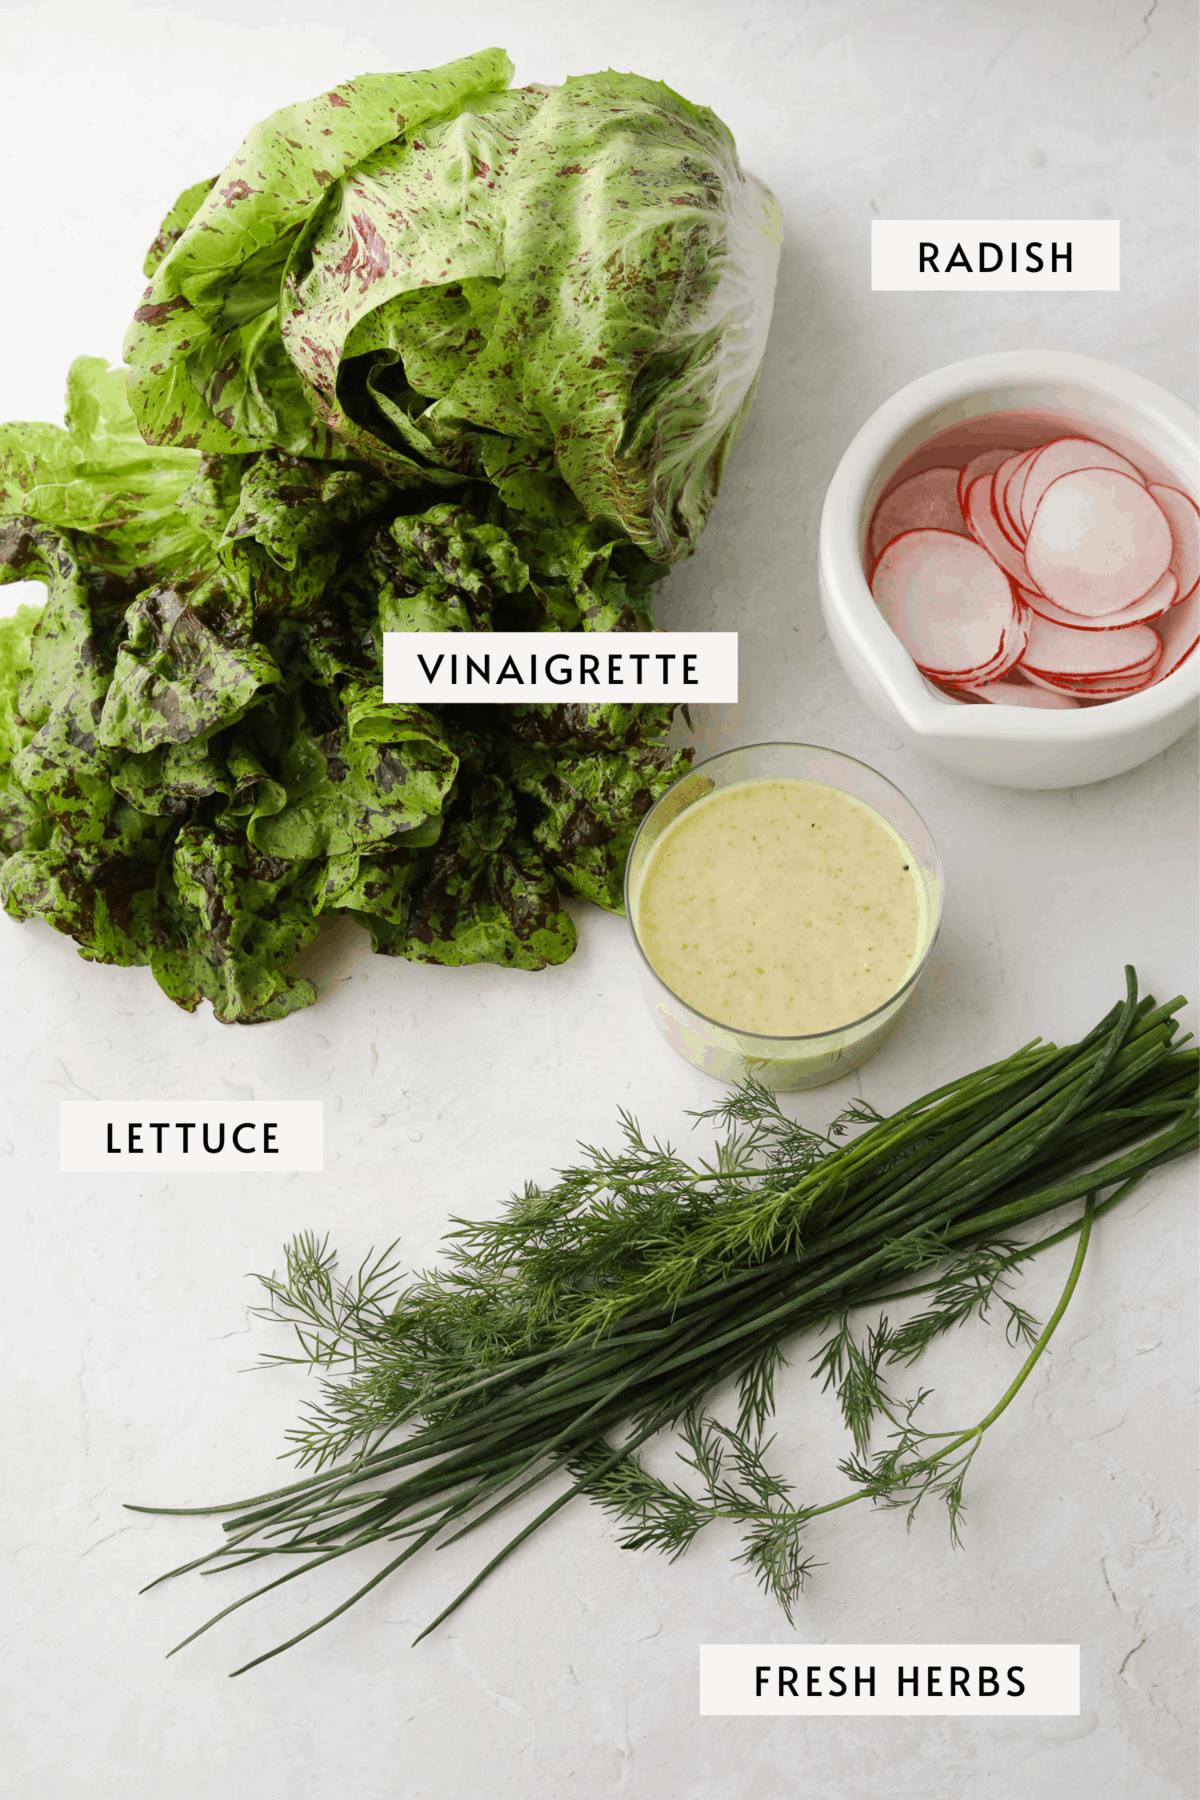 leafy green letuuce, chives, dill, sliced radish in water, a small bowl of salad dressing on a gray background